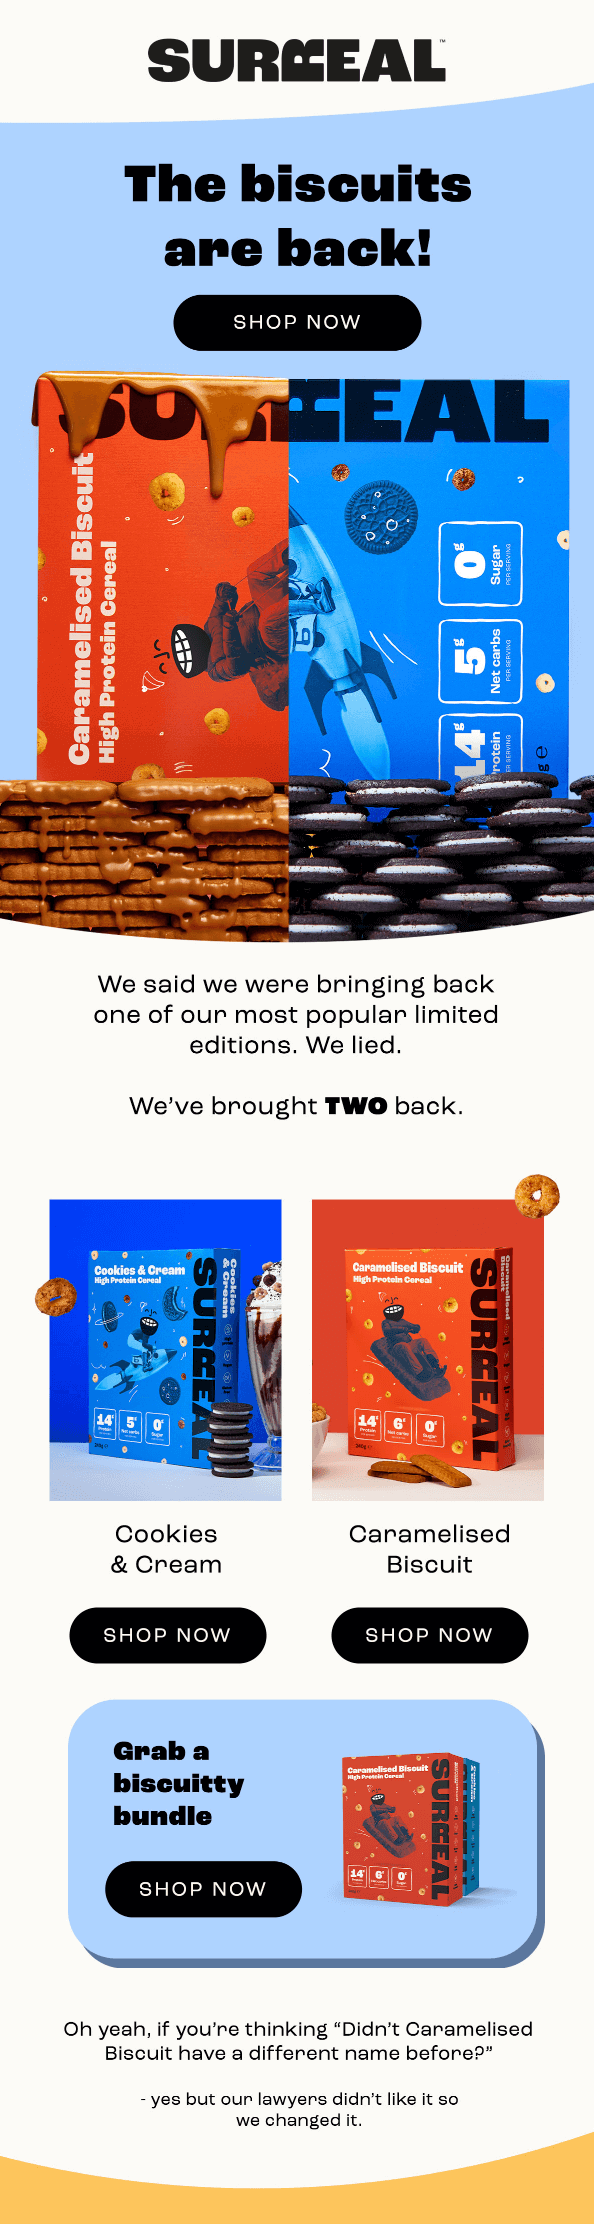 Surreal announces the return of two of their most popular limited editions of biscuits.